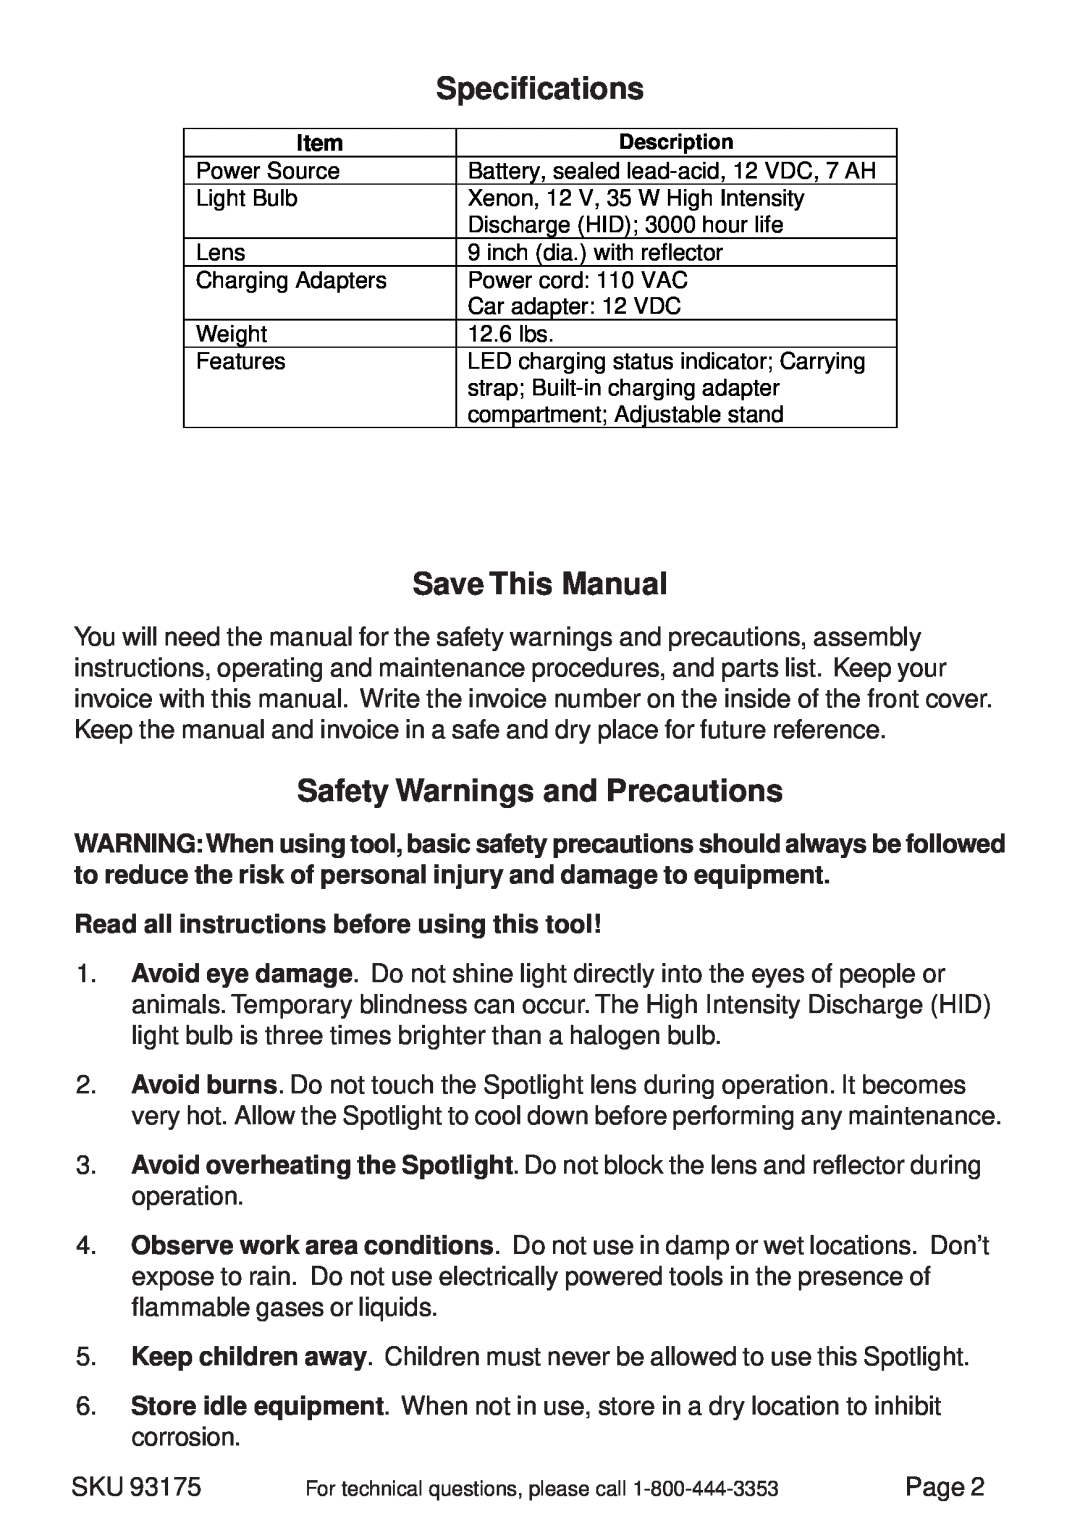 Chicago Electric 93175 operating instructions Specifications, Save This Manual, Safety Warnings and Precautions 